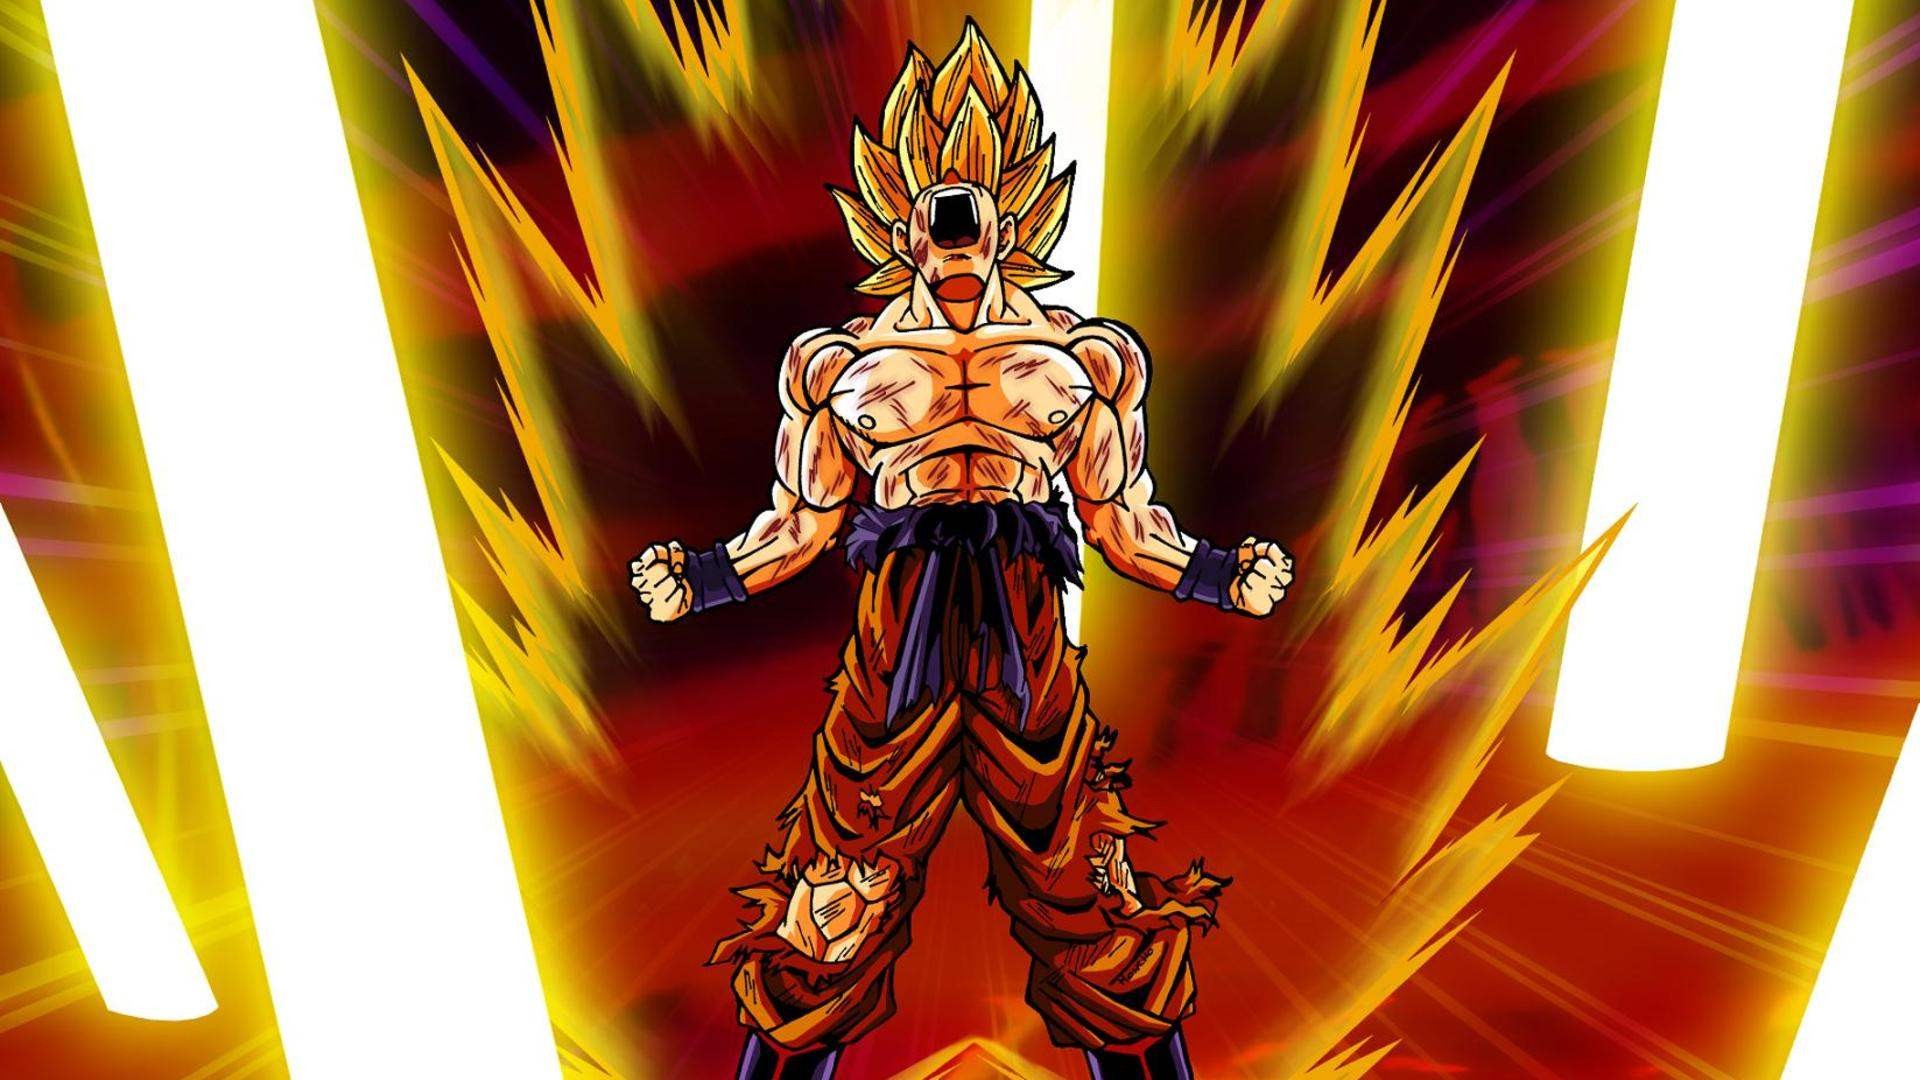 Anime 1920x1080 Dragon Ball Son Goku anime boys anime wounds blood open mouth standing muscles fist